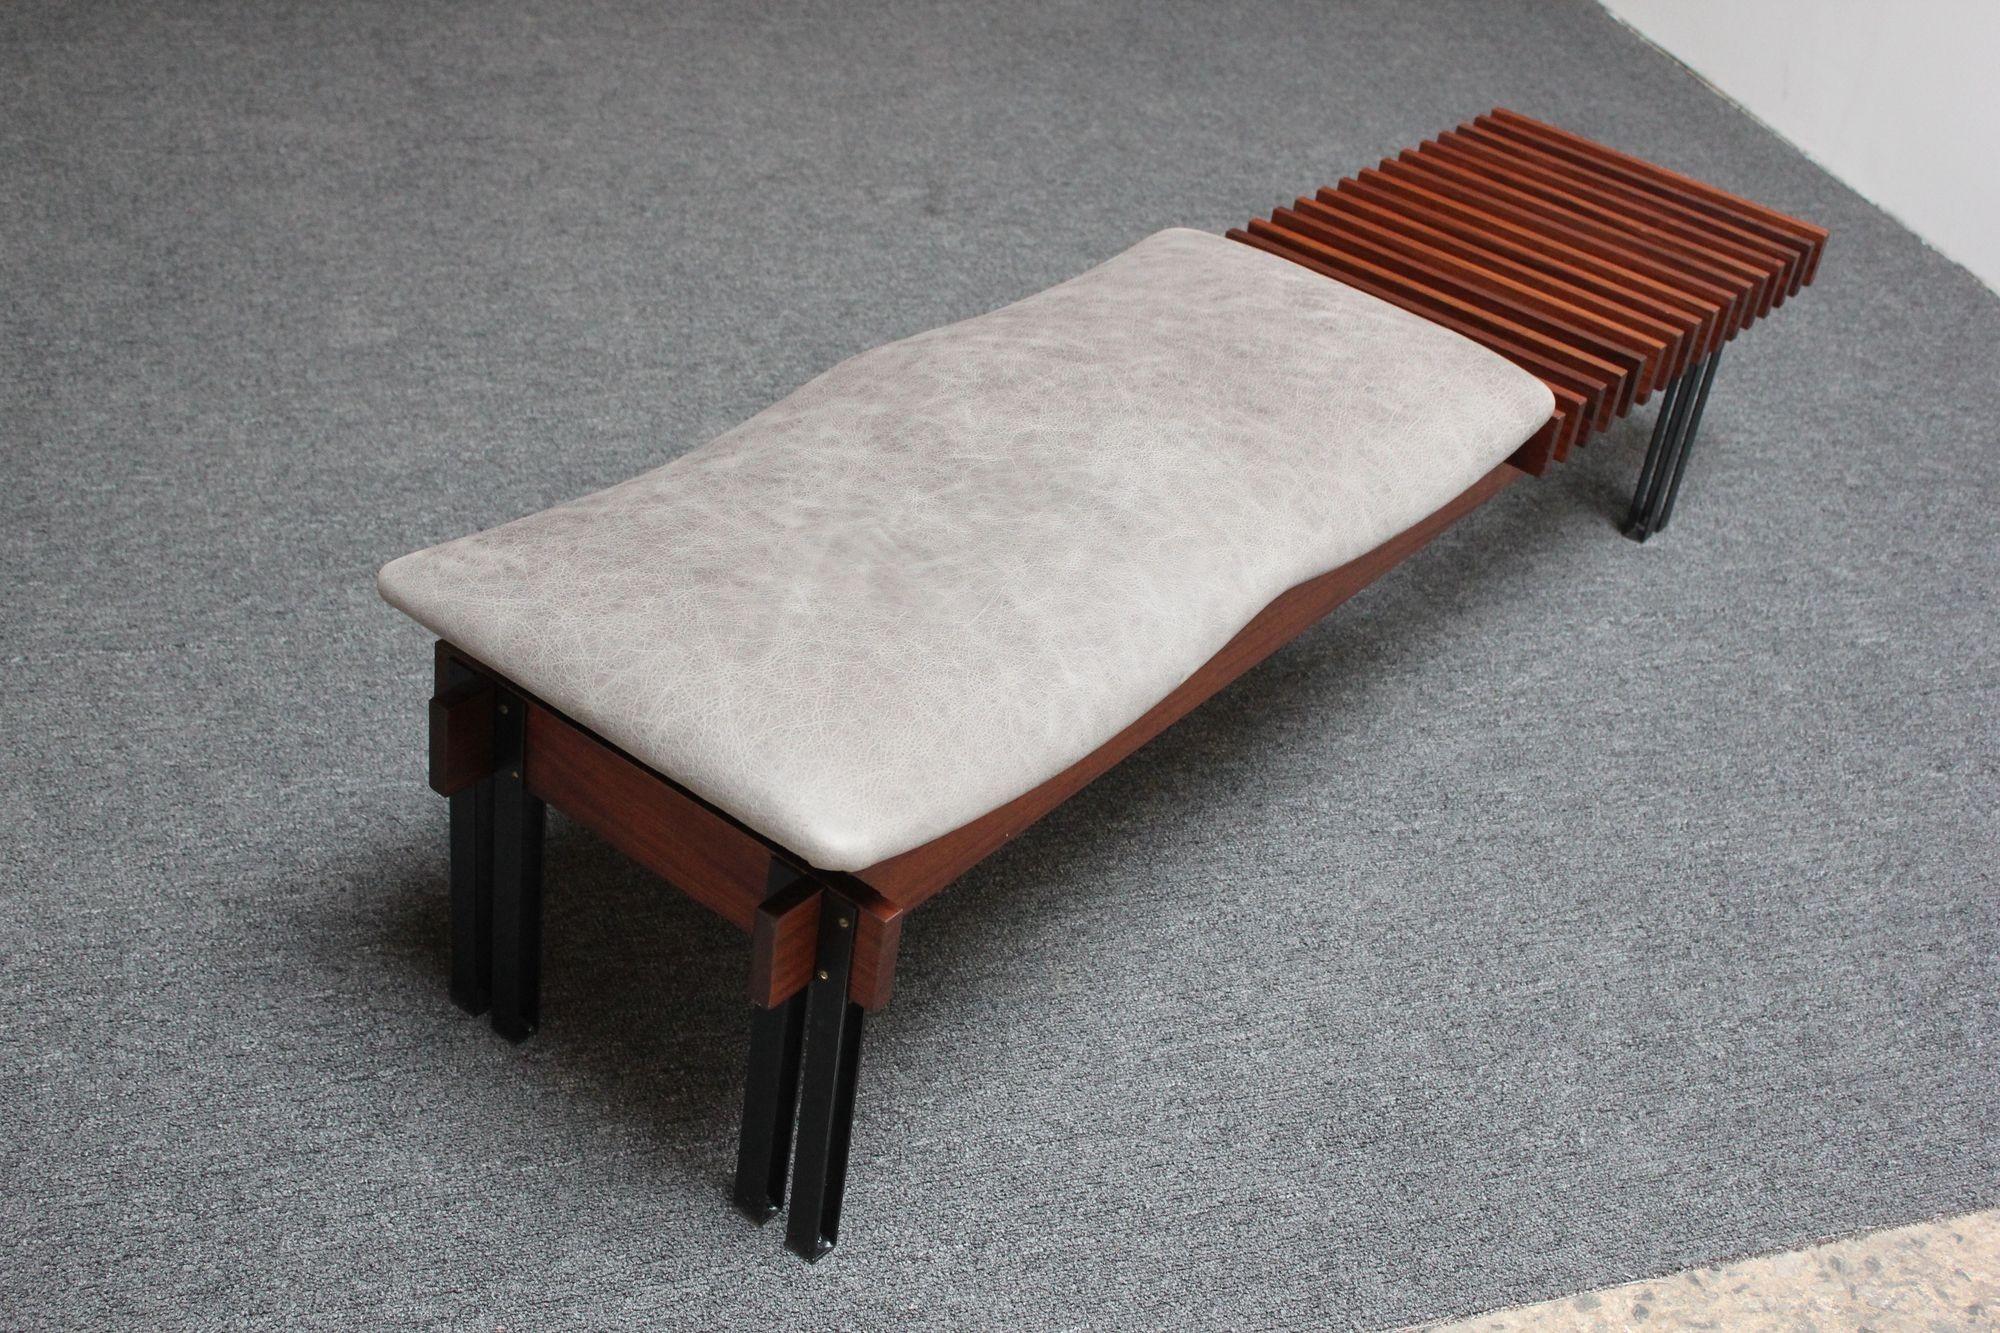 Italian Modernist Teak and Leather Bench by Inge and Luciano Rubino In Good Condition For Sale In Brooklyn, NY